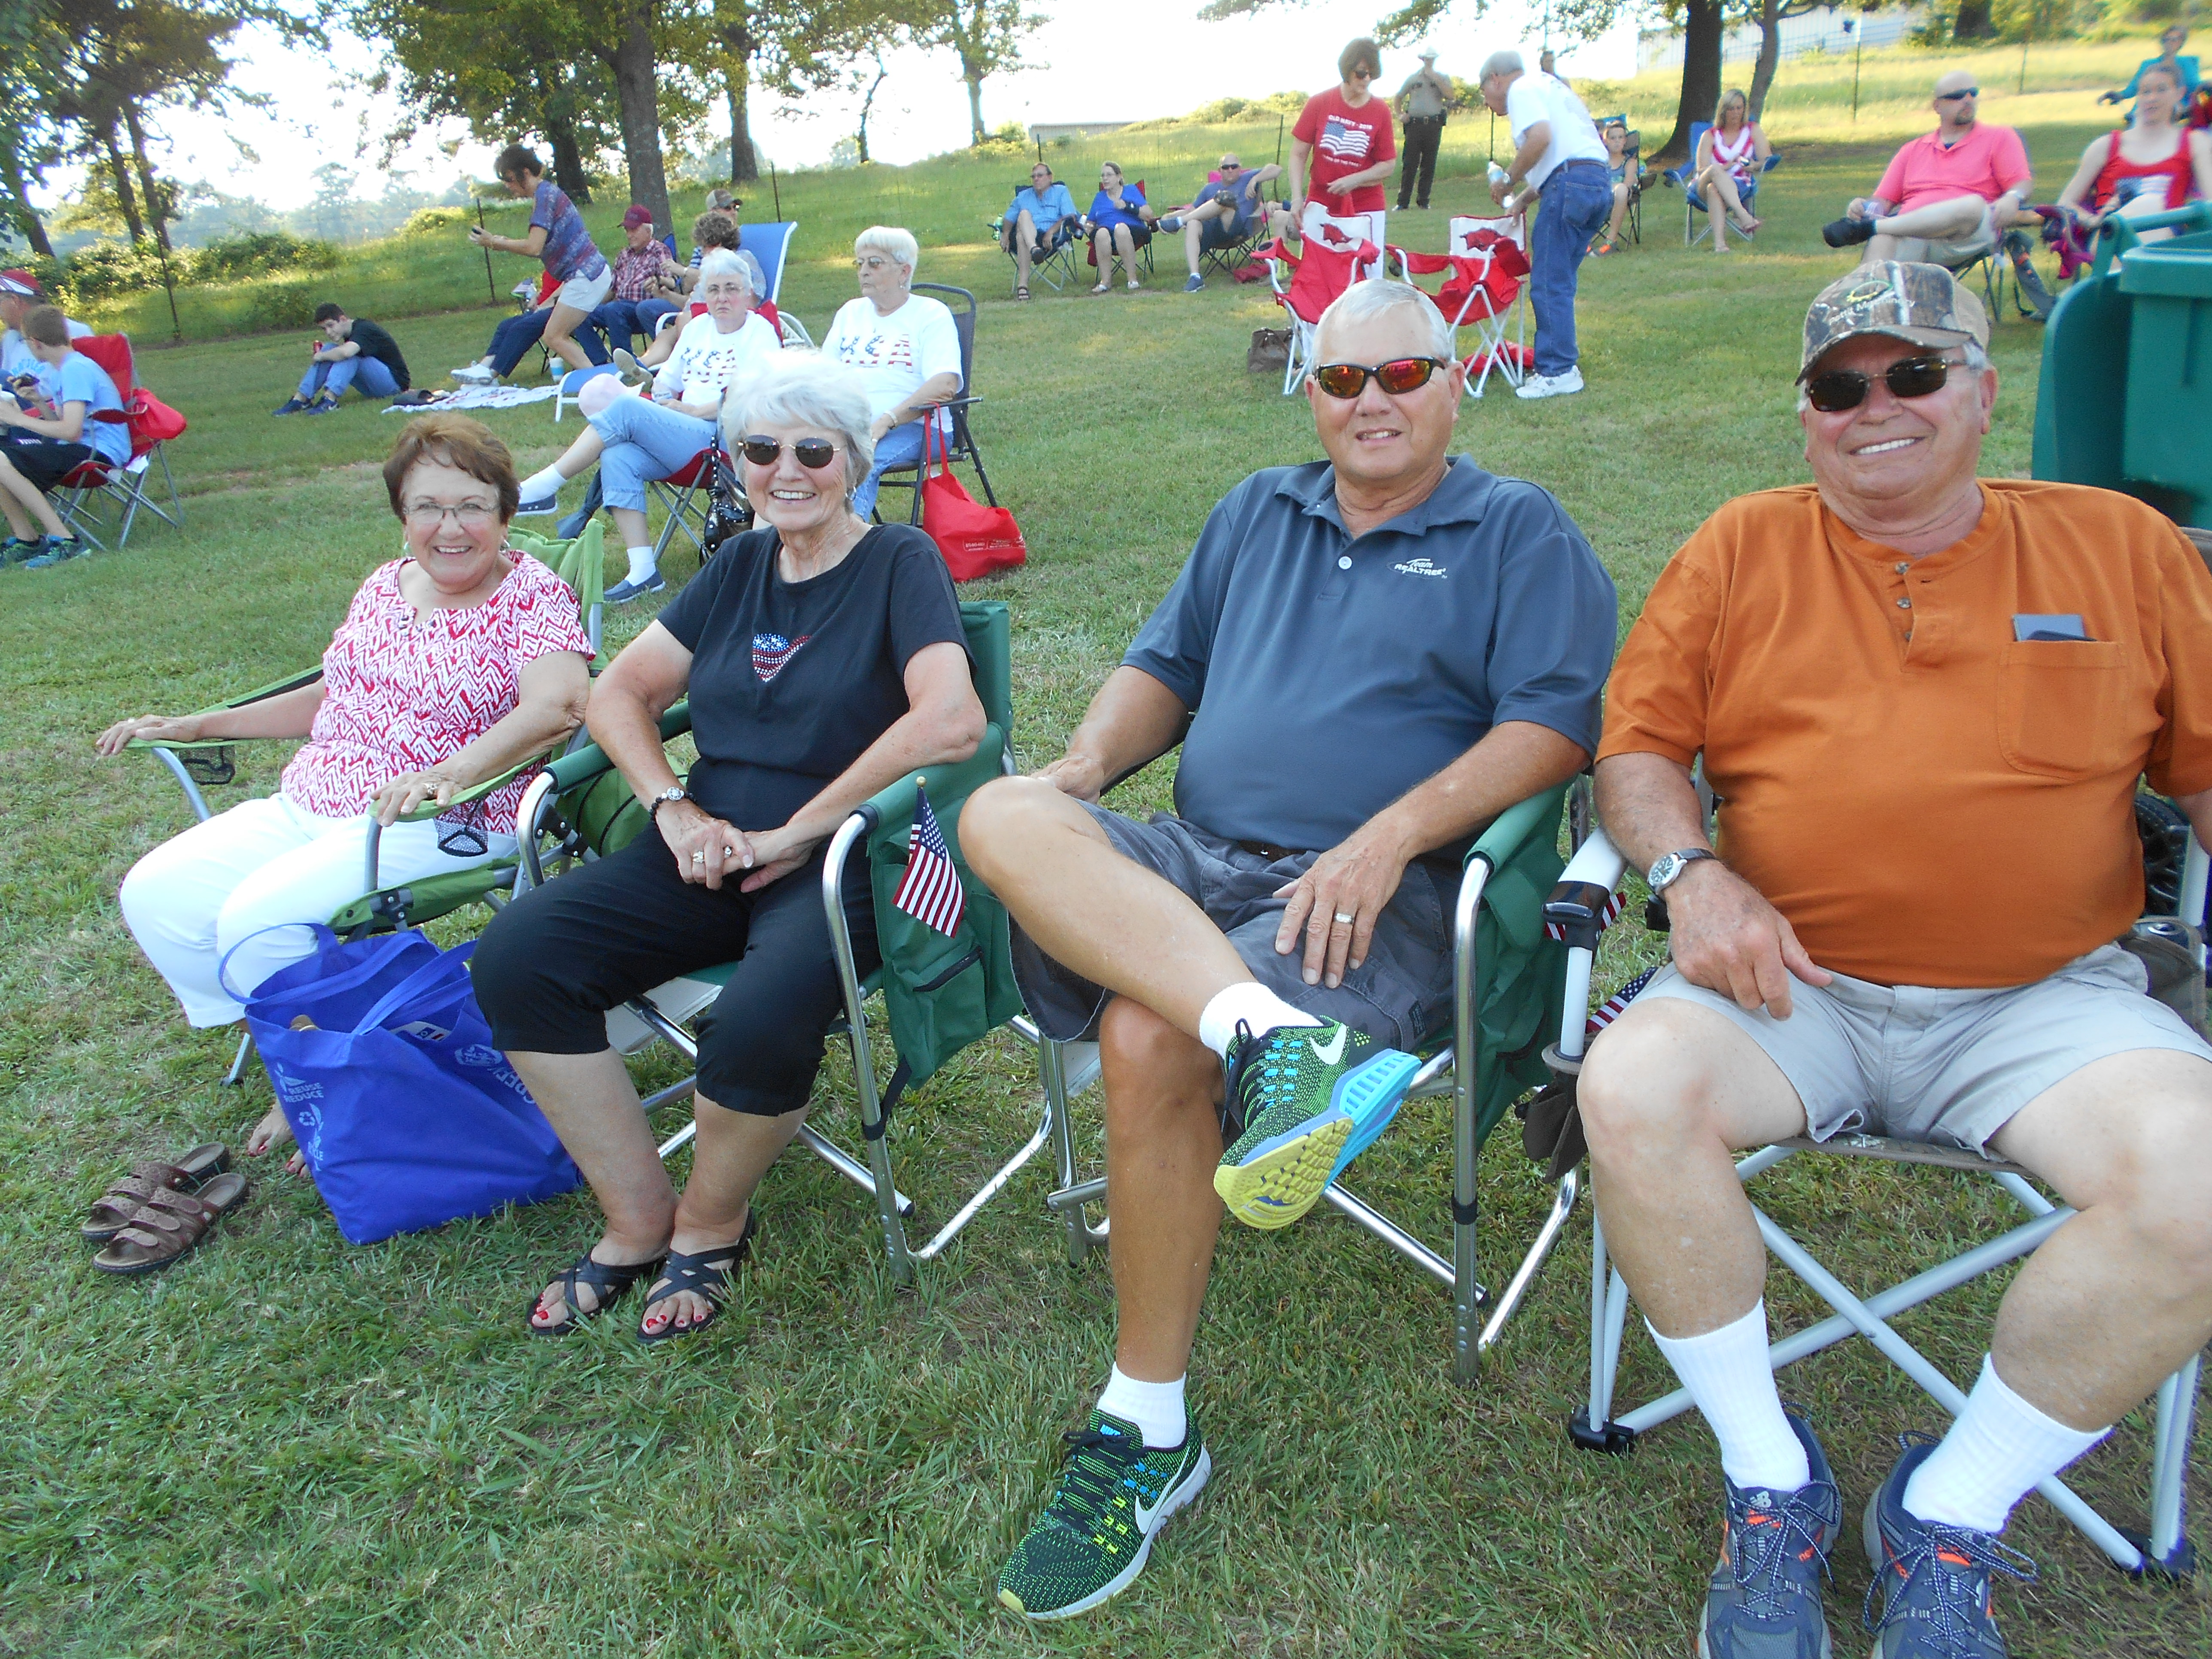 Dana, far left, and Donnie Newberg, far right, with their friends Reasel, left, and Hobert Thurgood from Rison. The Thurgoods were camping at Blue Ridge Recreational Area on Dierks Lake, and came to Nashville to see their first Stand Up show.